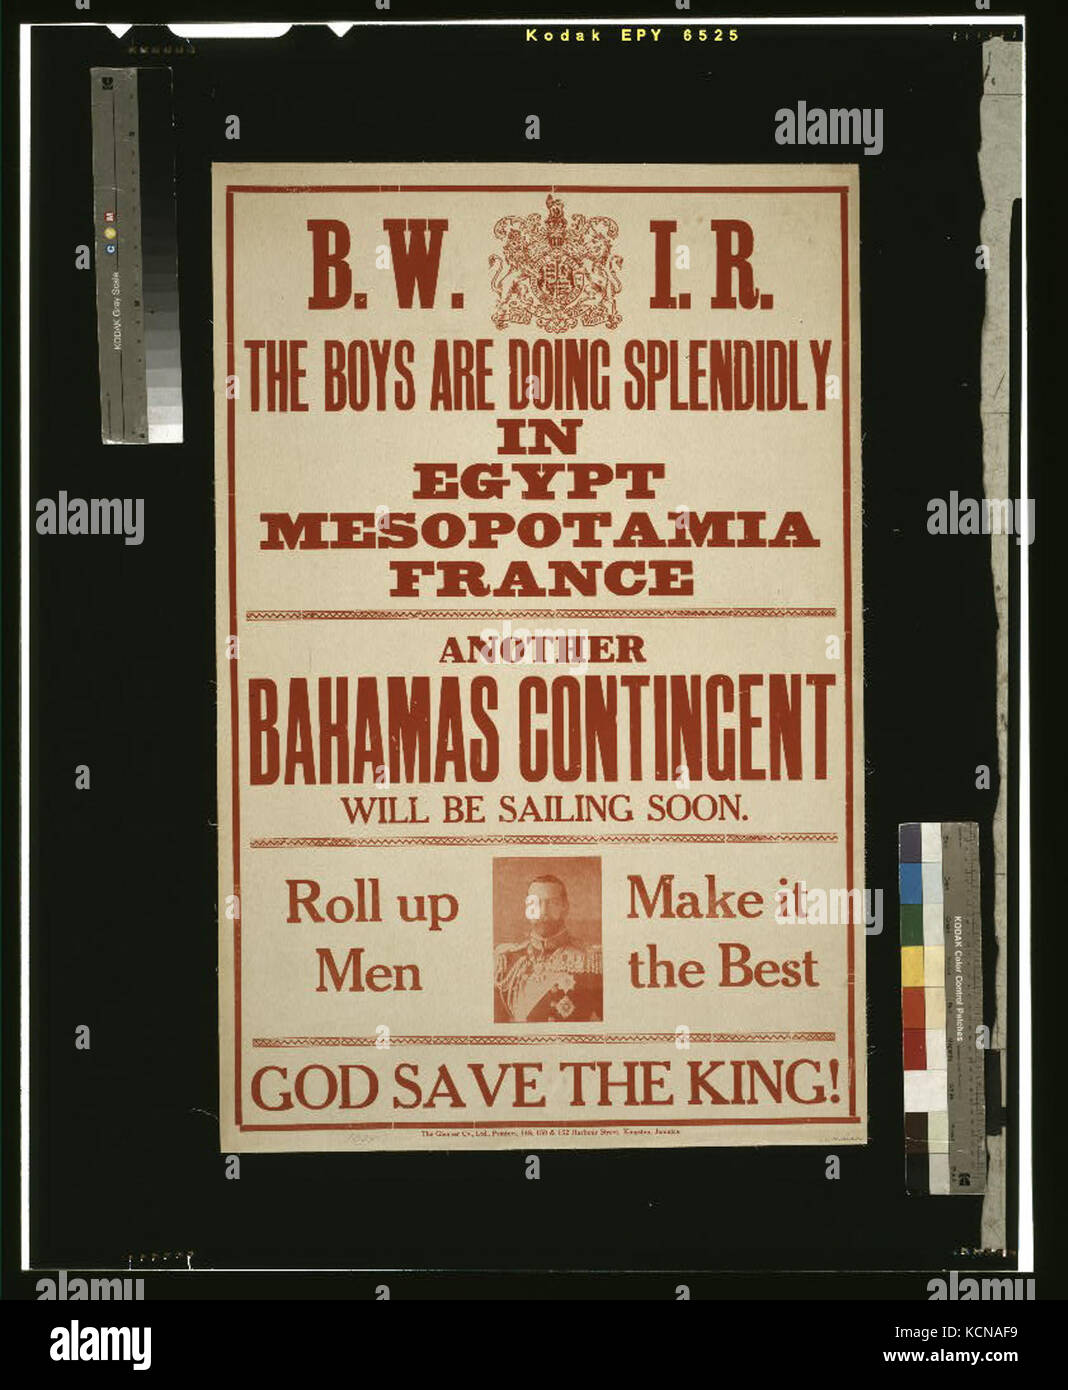 B.W.I.R. The boys are doing splendidly in Egypt Mesopotamia France. Another Bahamas contingent will be sailing soon. Roll up men. Make it the best. God save the king LCCN2003675299 Stock Photo